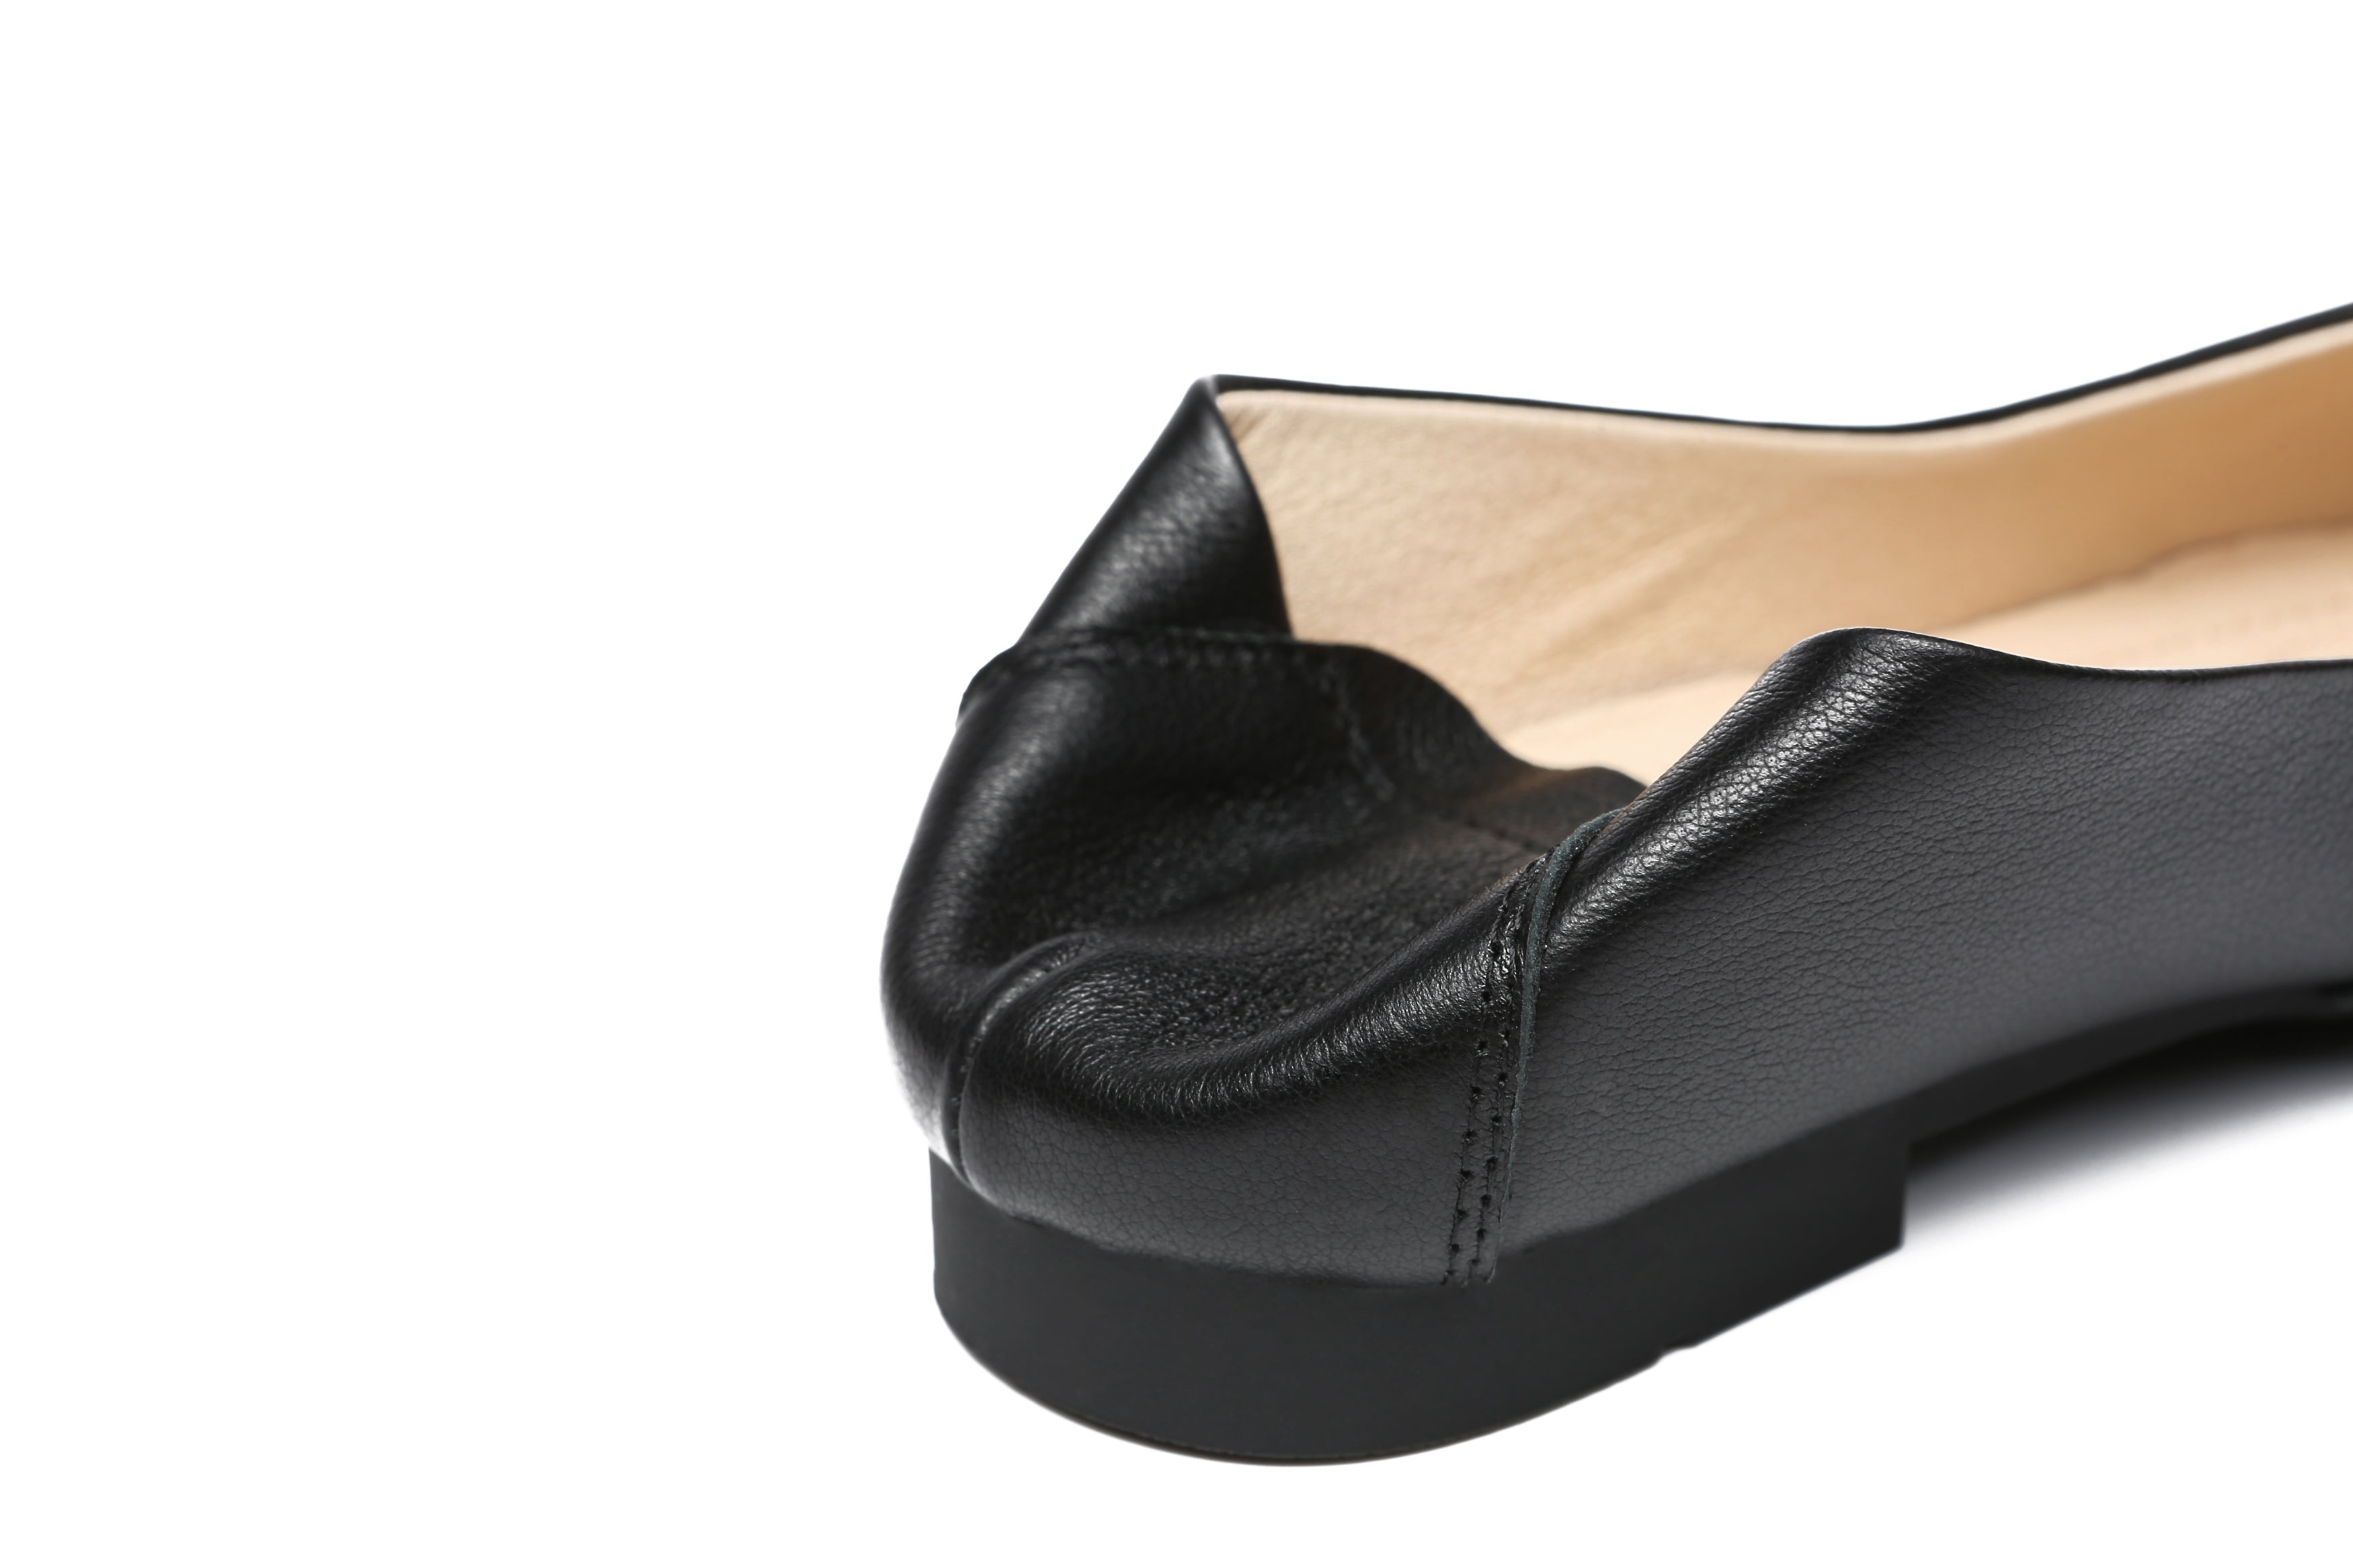 Flats - Everly Pointed Toe Ballet Leather Flats